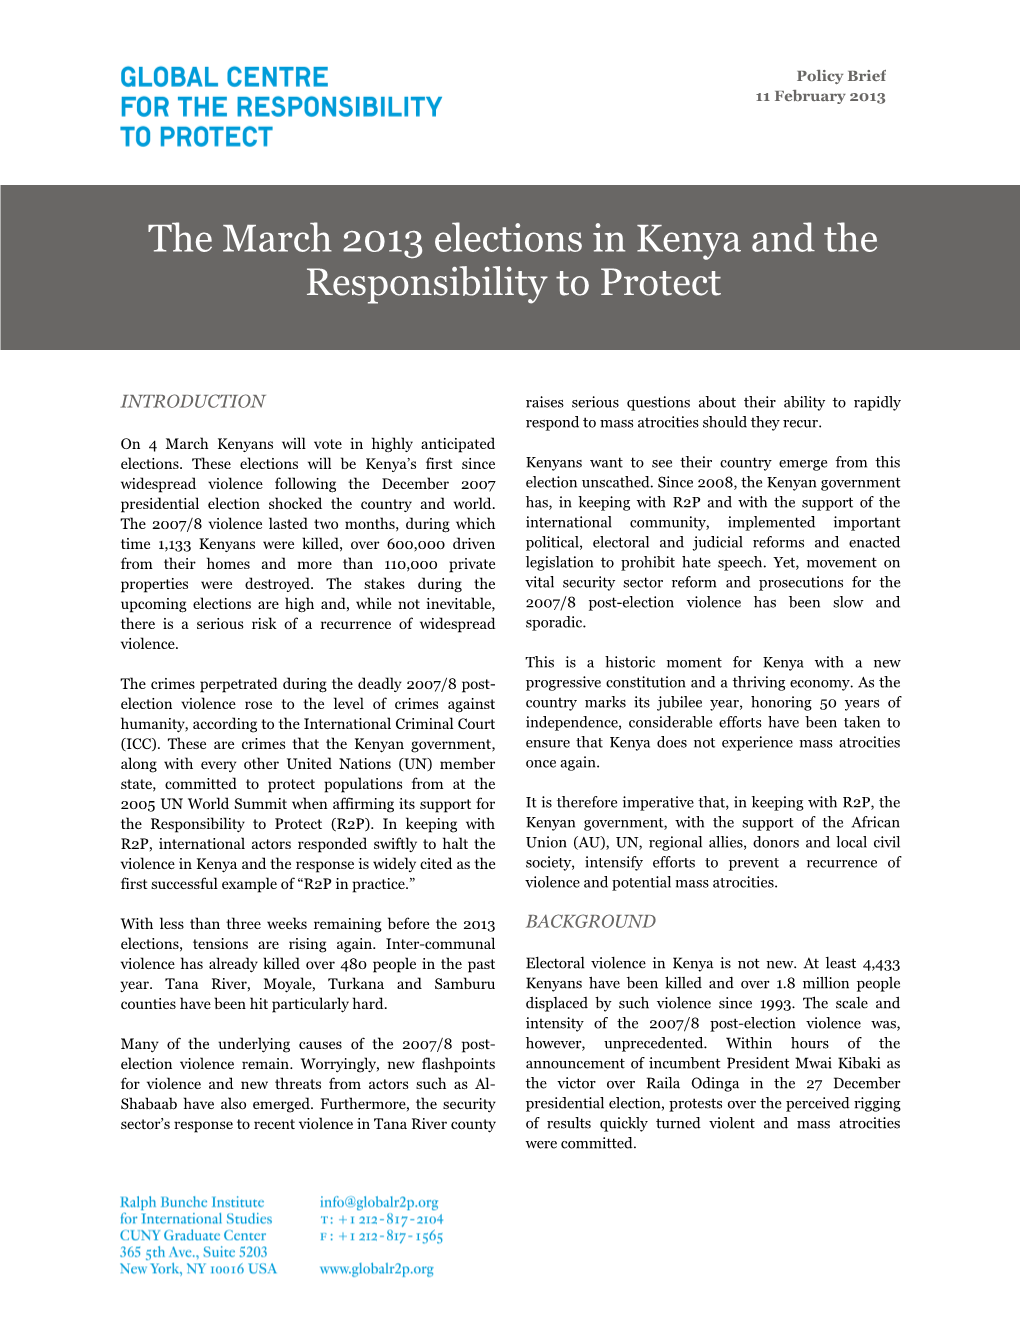 The March 2013 Elections in Kenya and the Responsibility to Protect